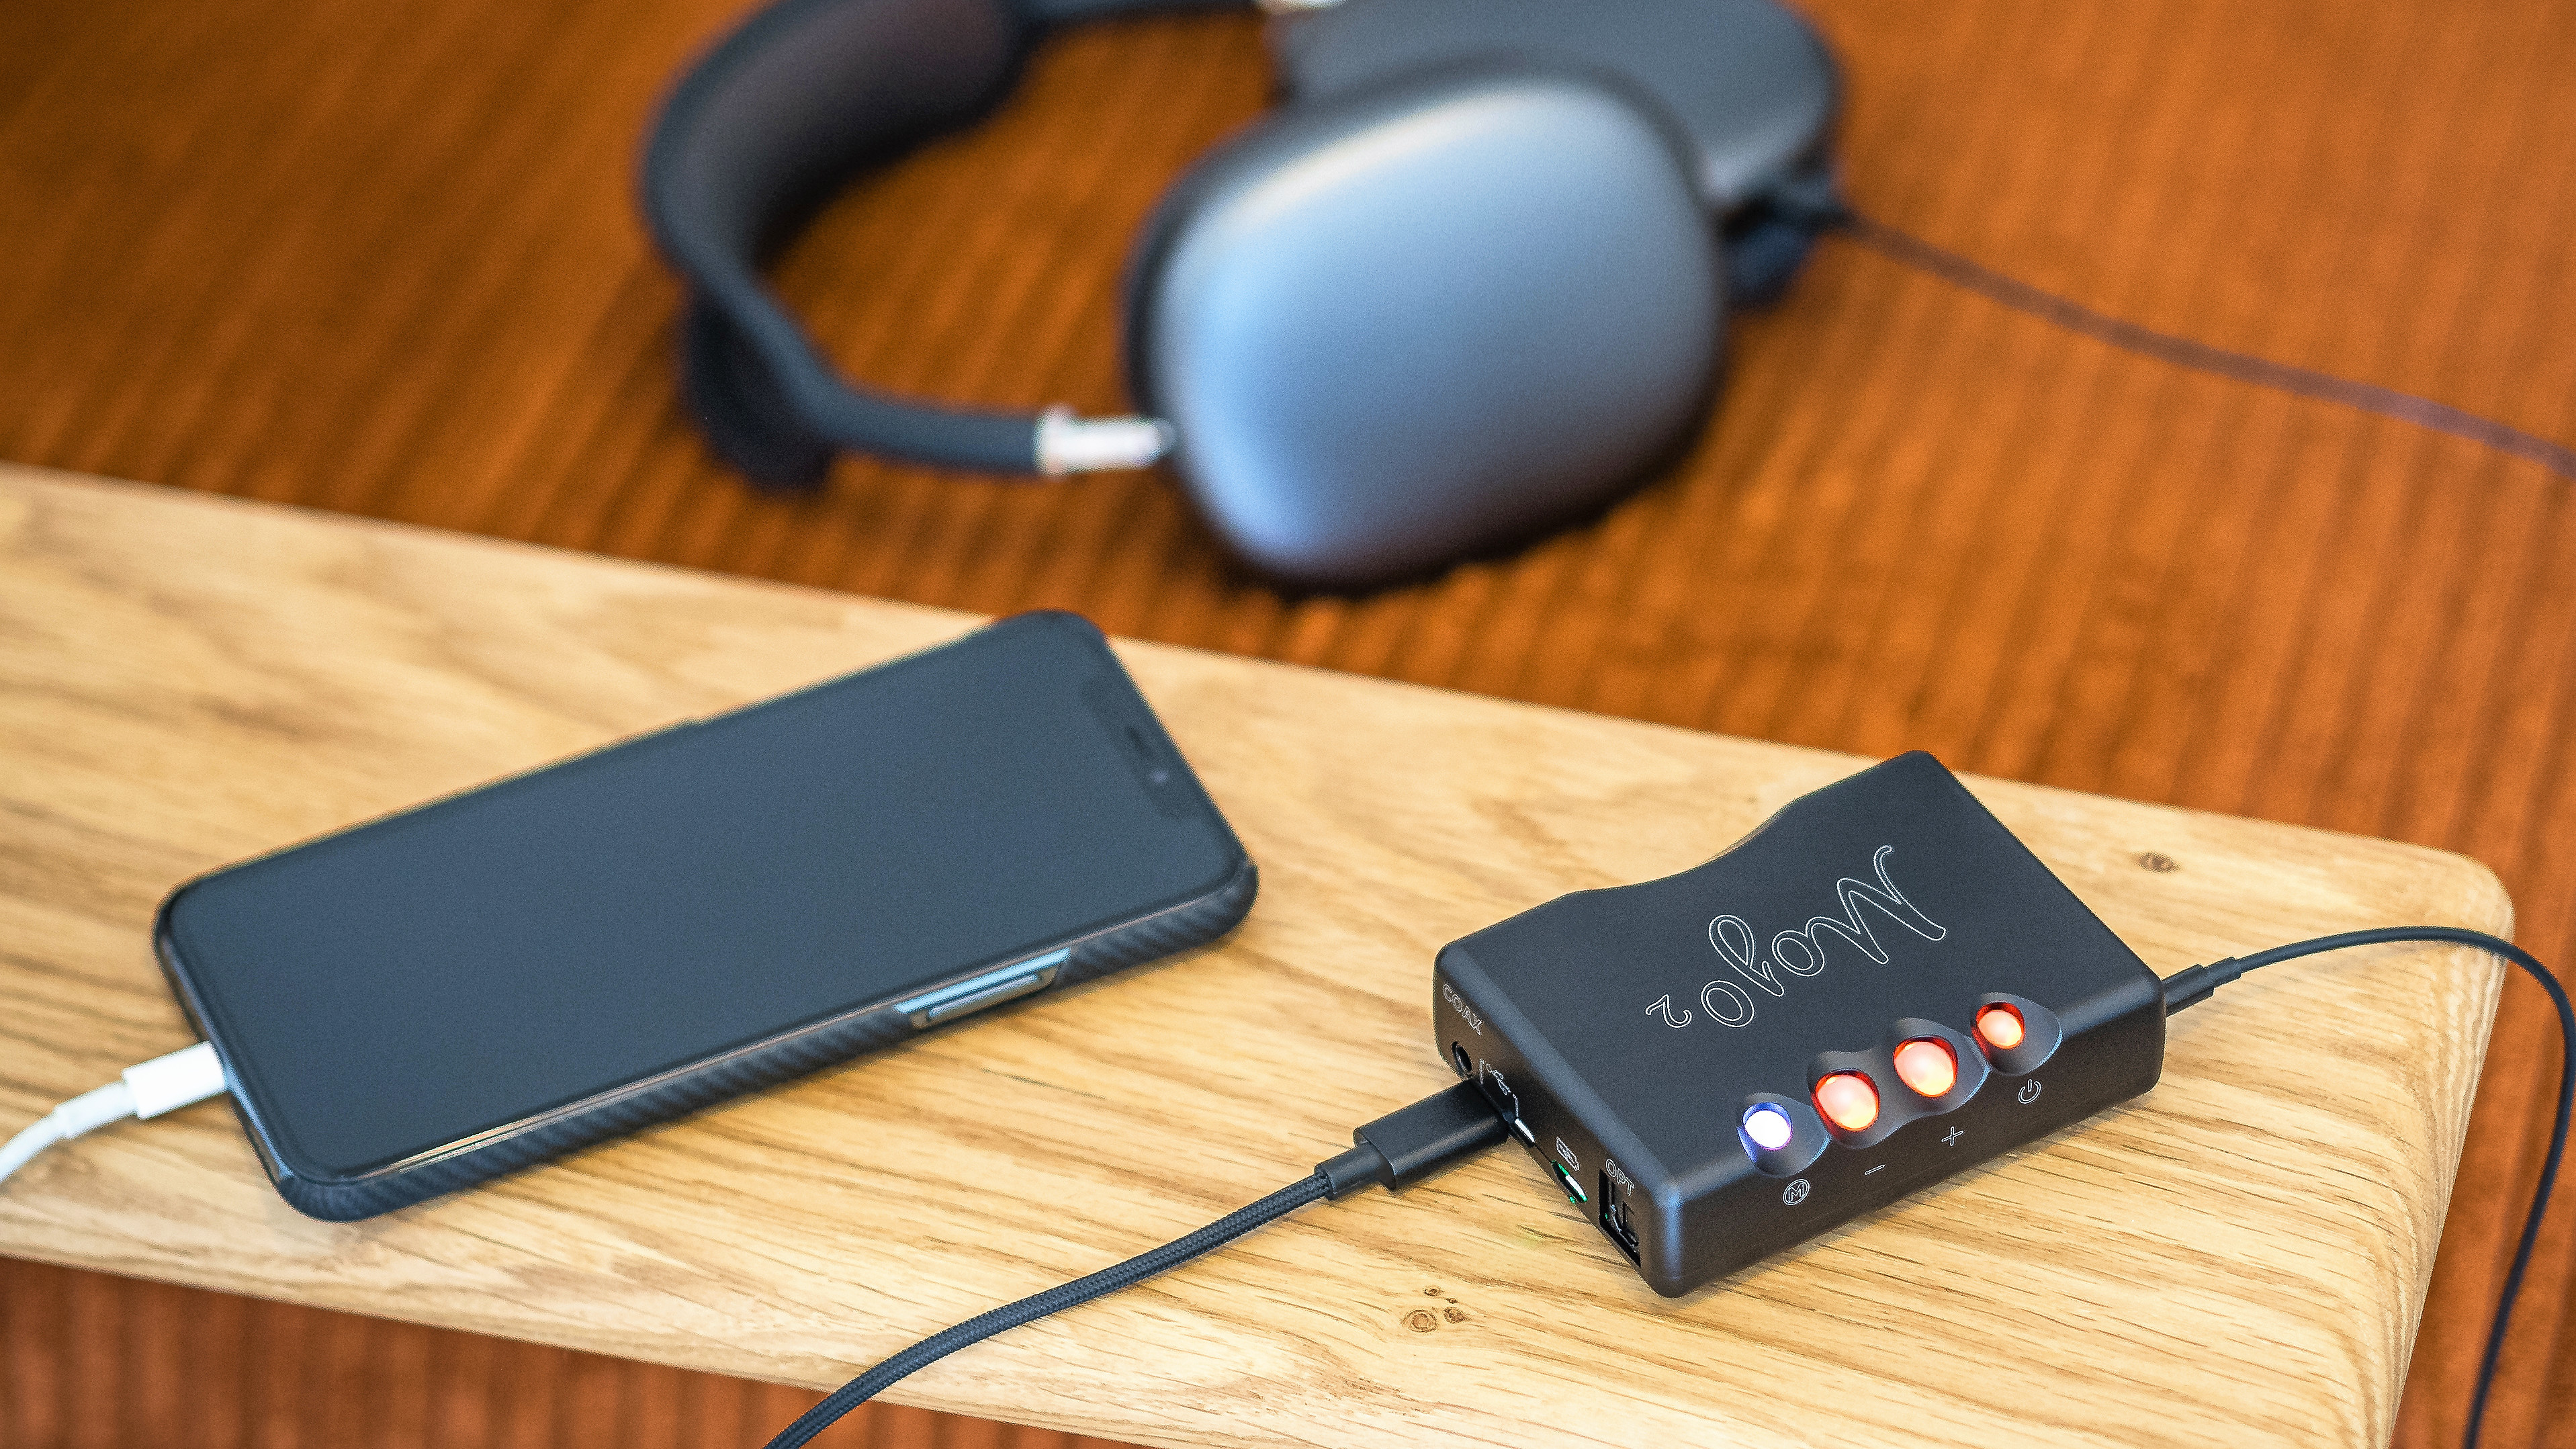 Do you really need an external DAC to get the most from Apple